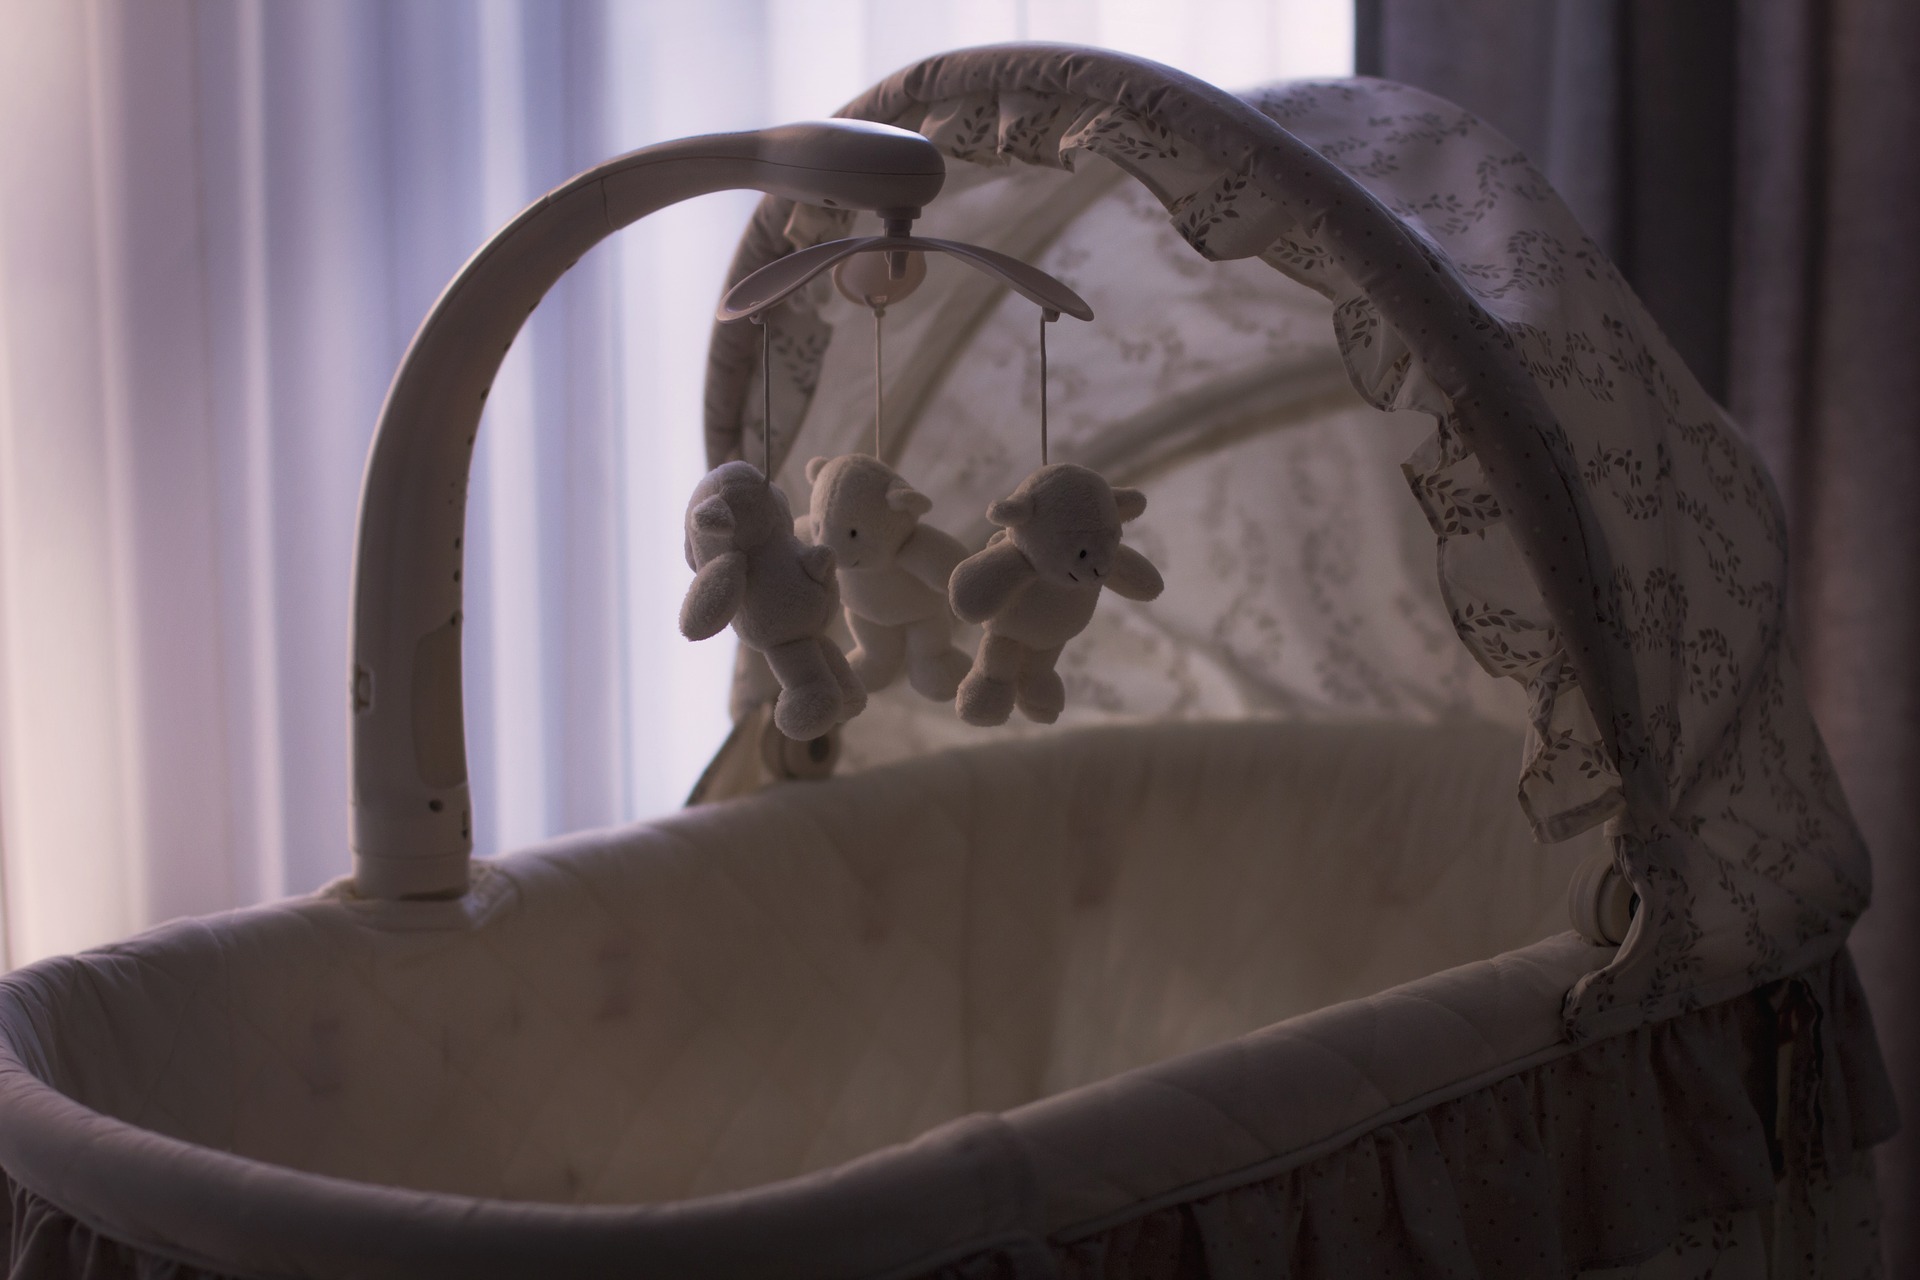 An empty baby cradle, with a spinning mobile of bear toys hanging above.